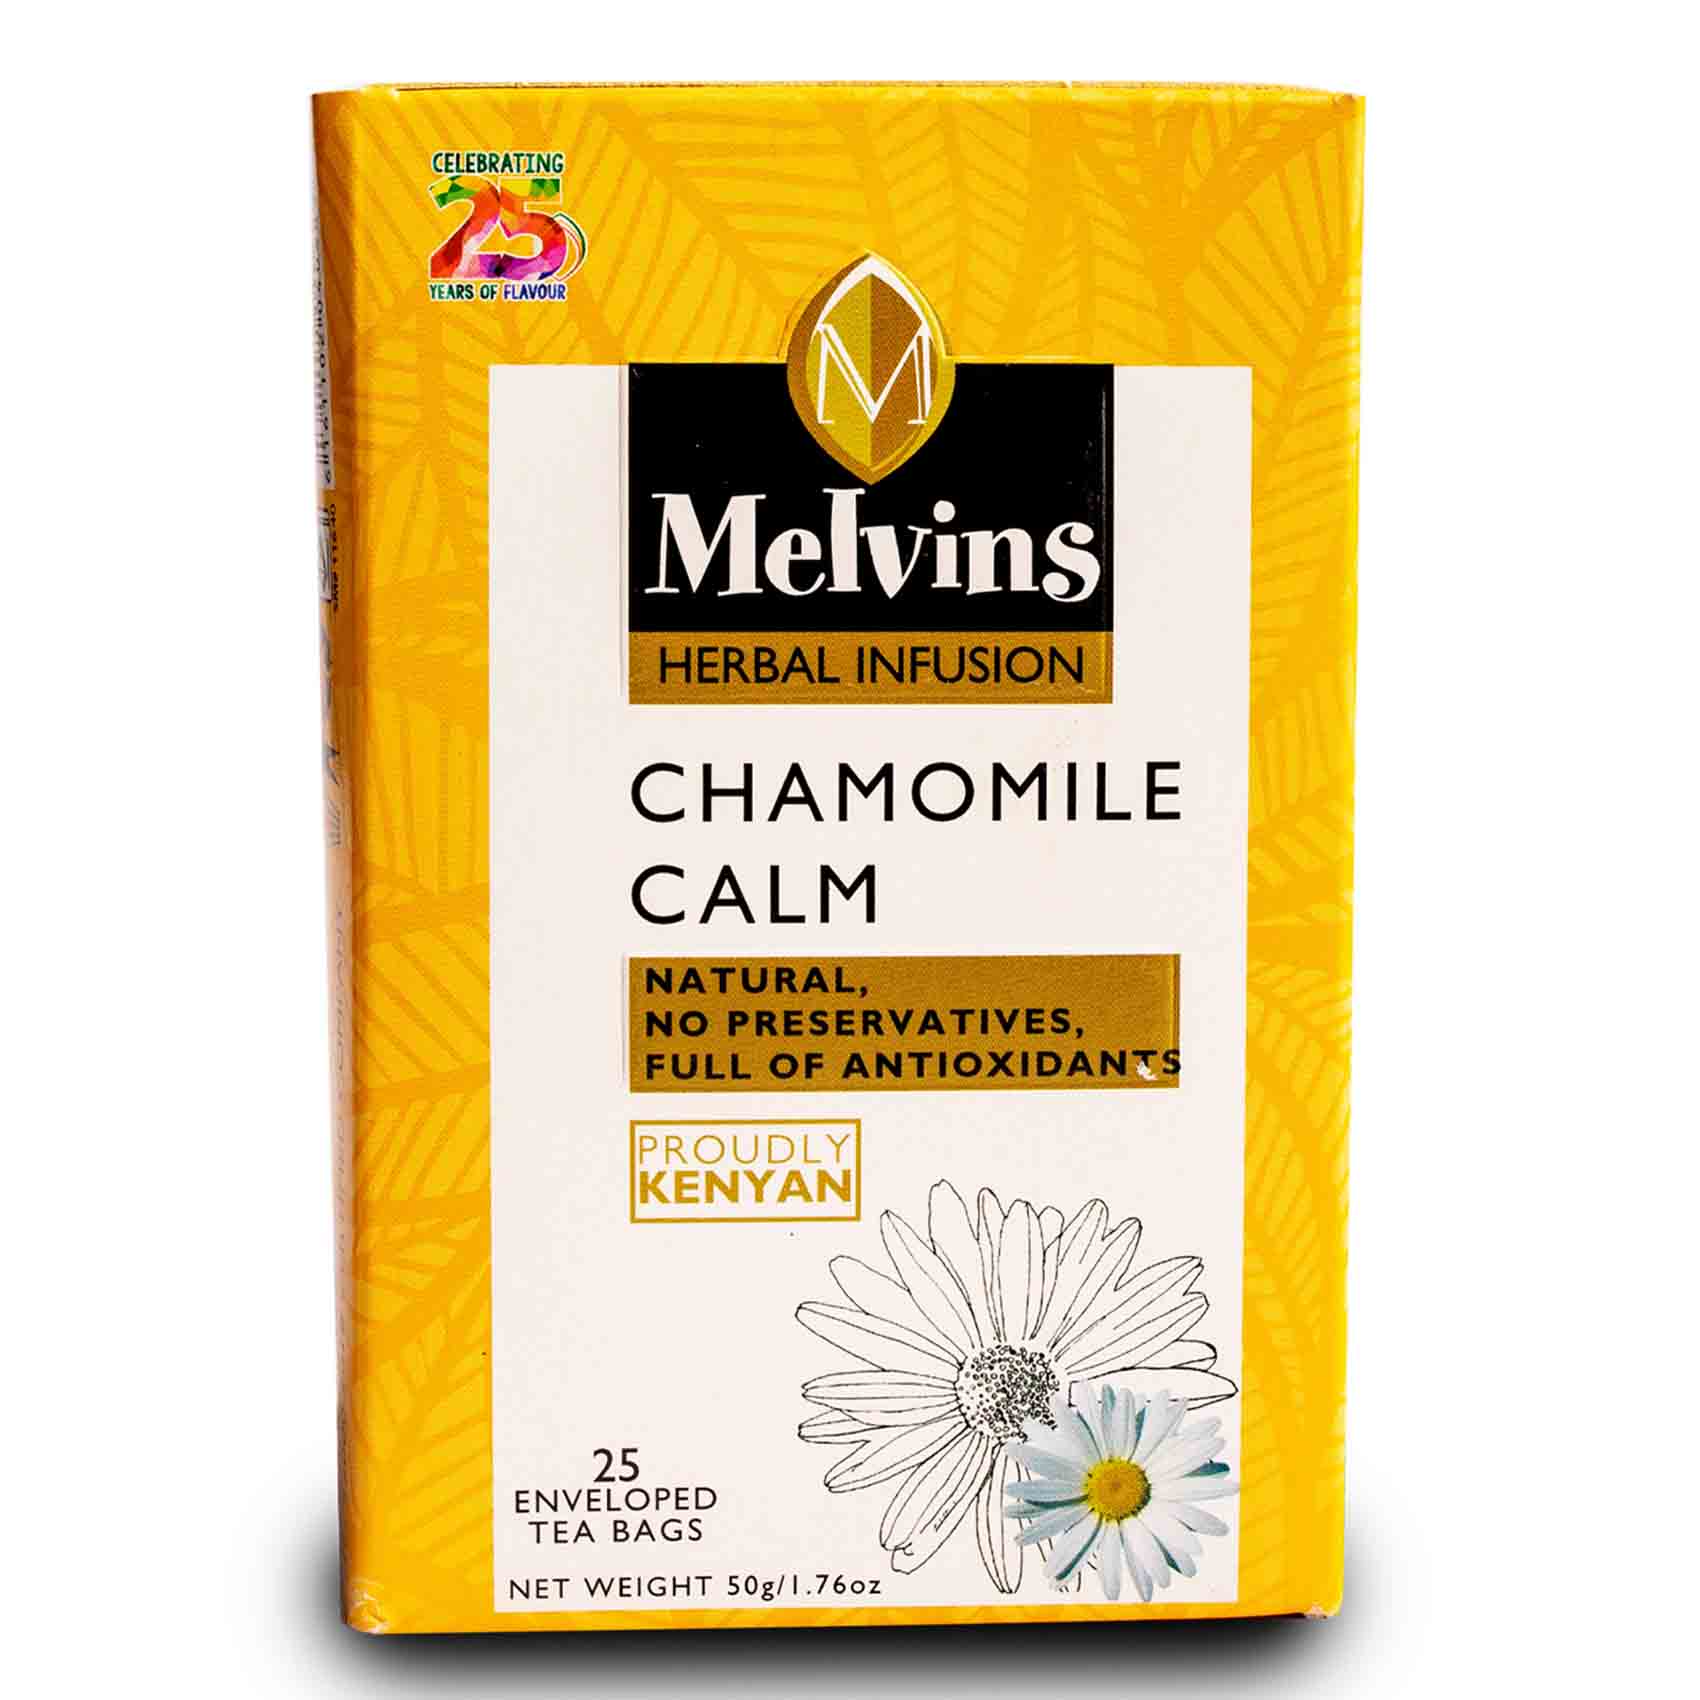 Melvins Chamomile Tea Bags 25 Count